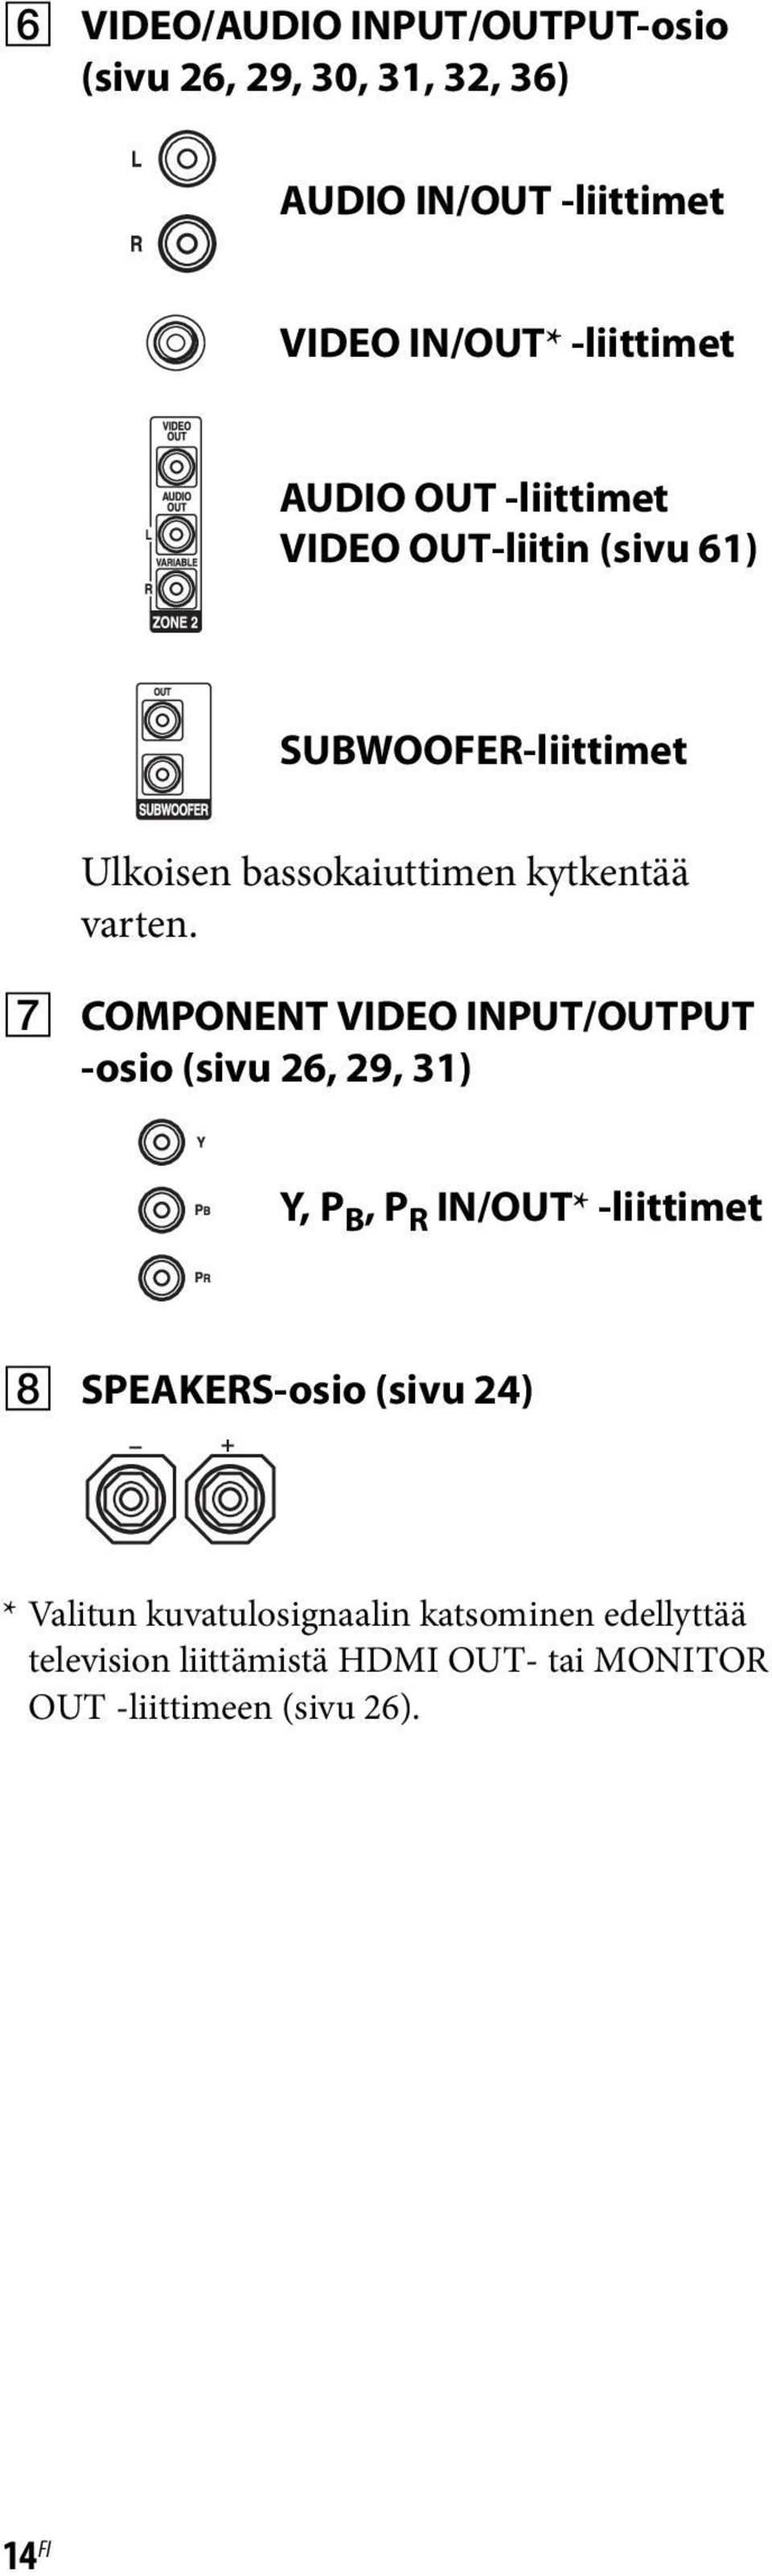 G COMPONENT VIDEO INPUT/OUTPUT -osio (sivu 26, 29, 31) Y, P B, P R IN/OUT* -liittimet H SPEAKERS-osio (sivu 24) *